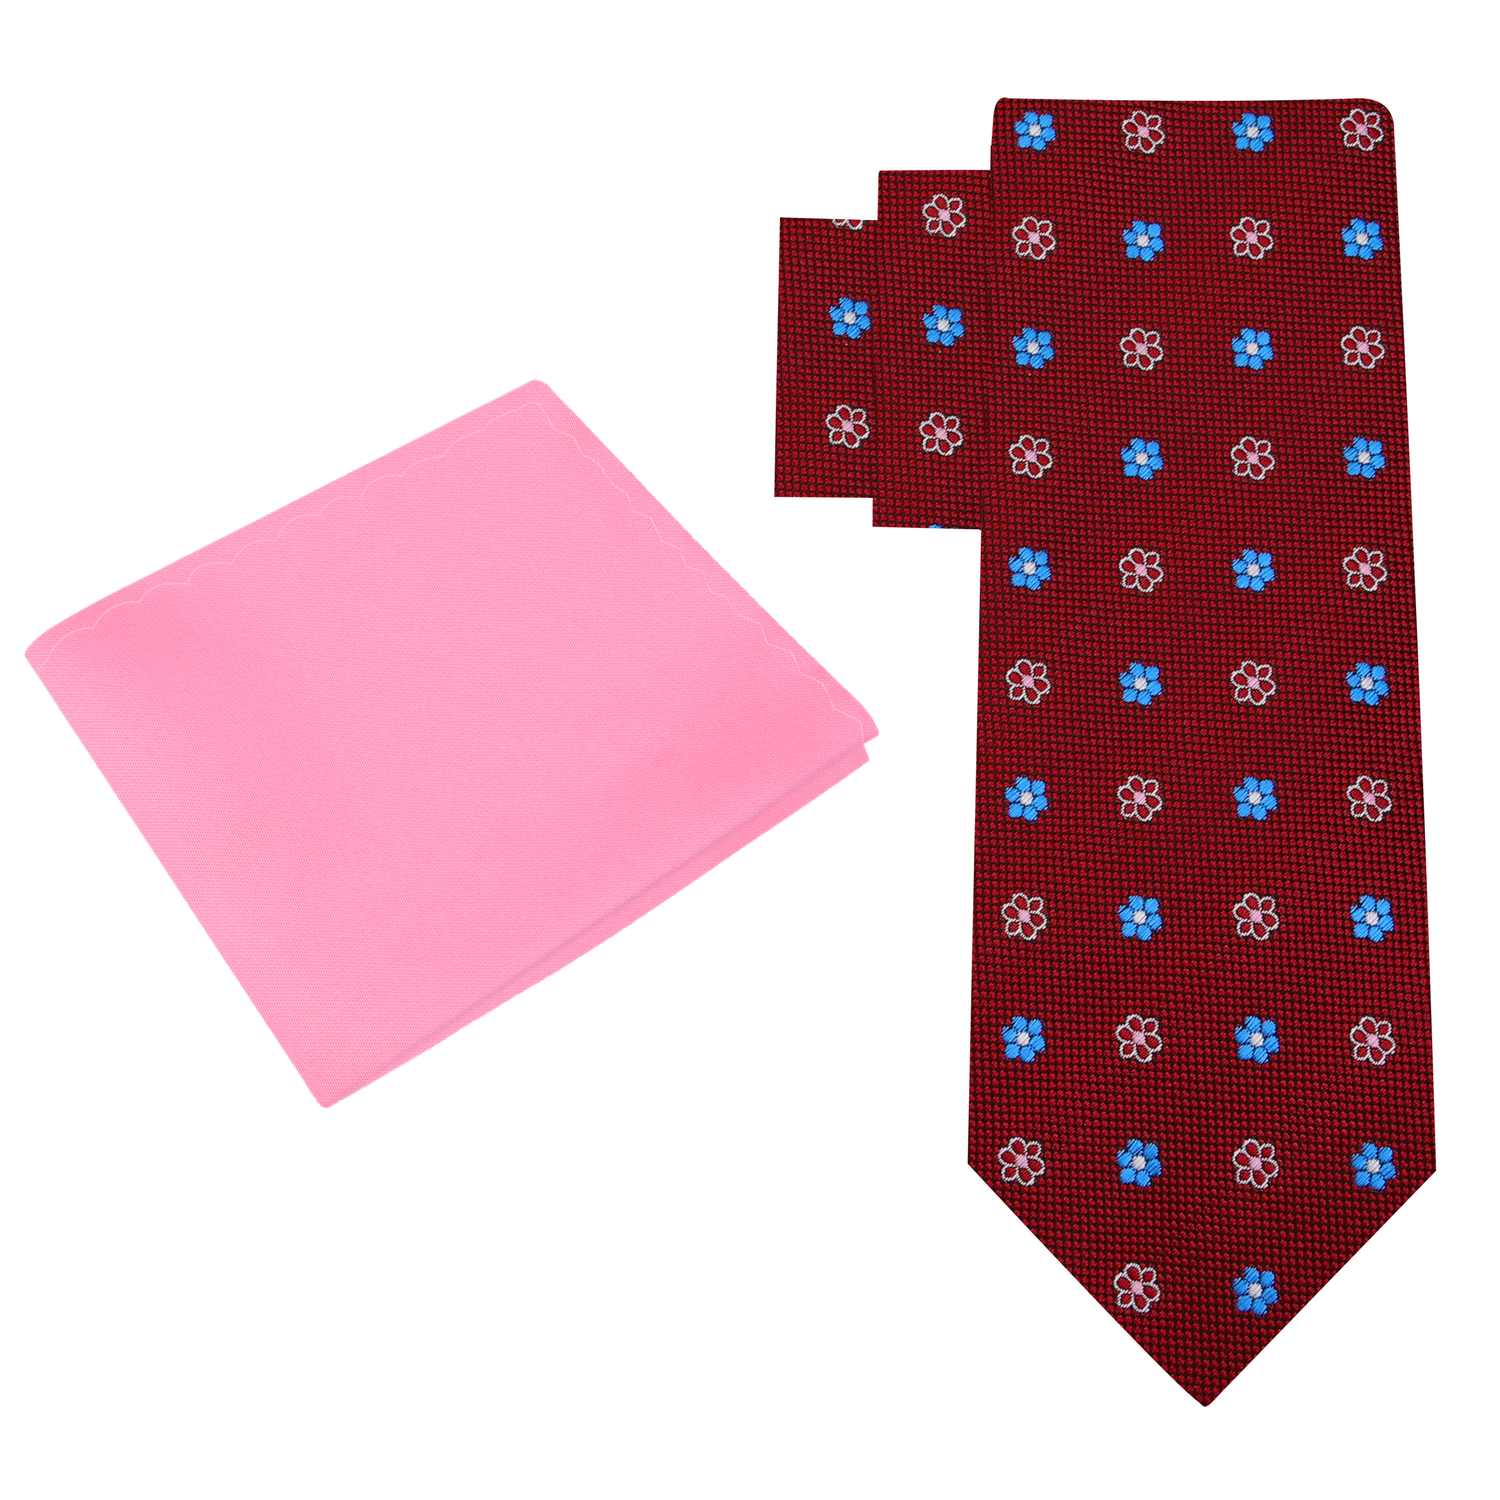 Alt View: Red, Blue, Pink Small Flower Necktie and Pink Square